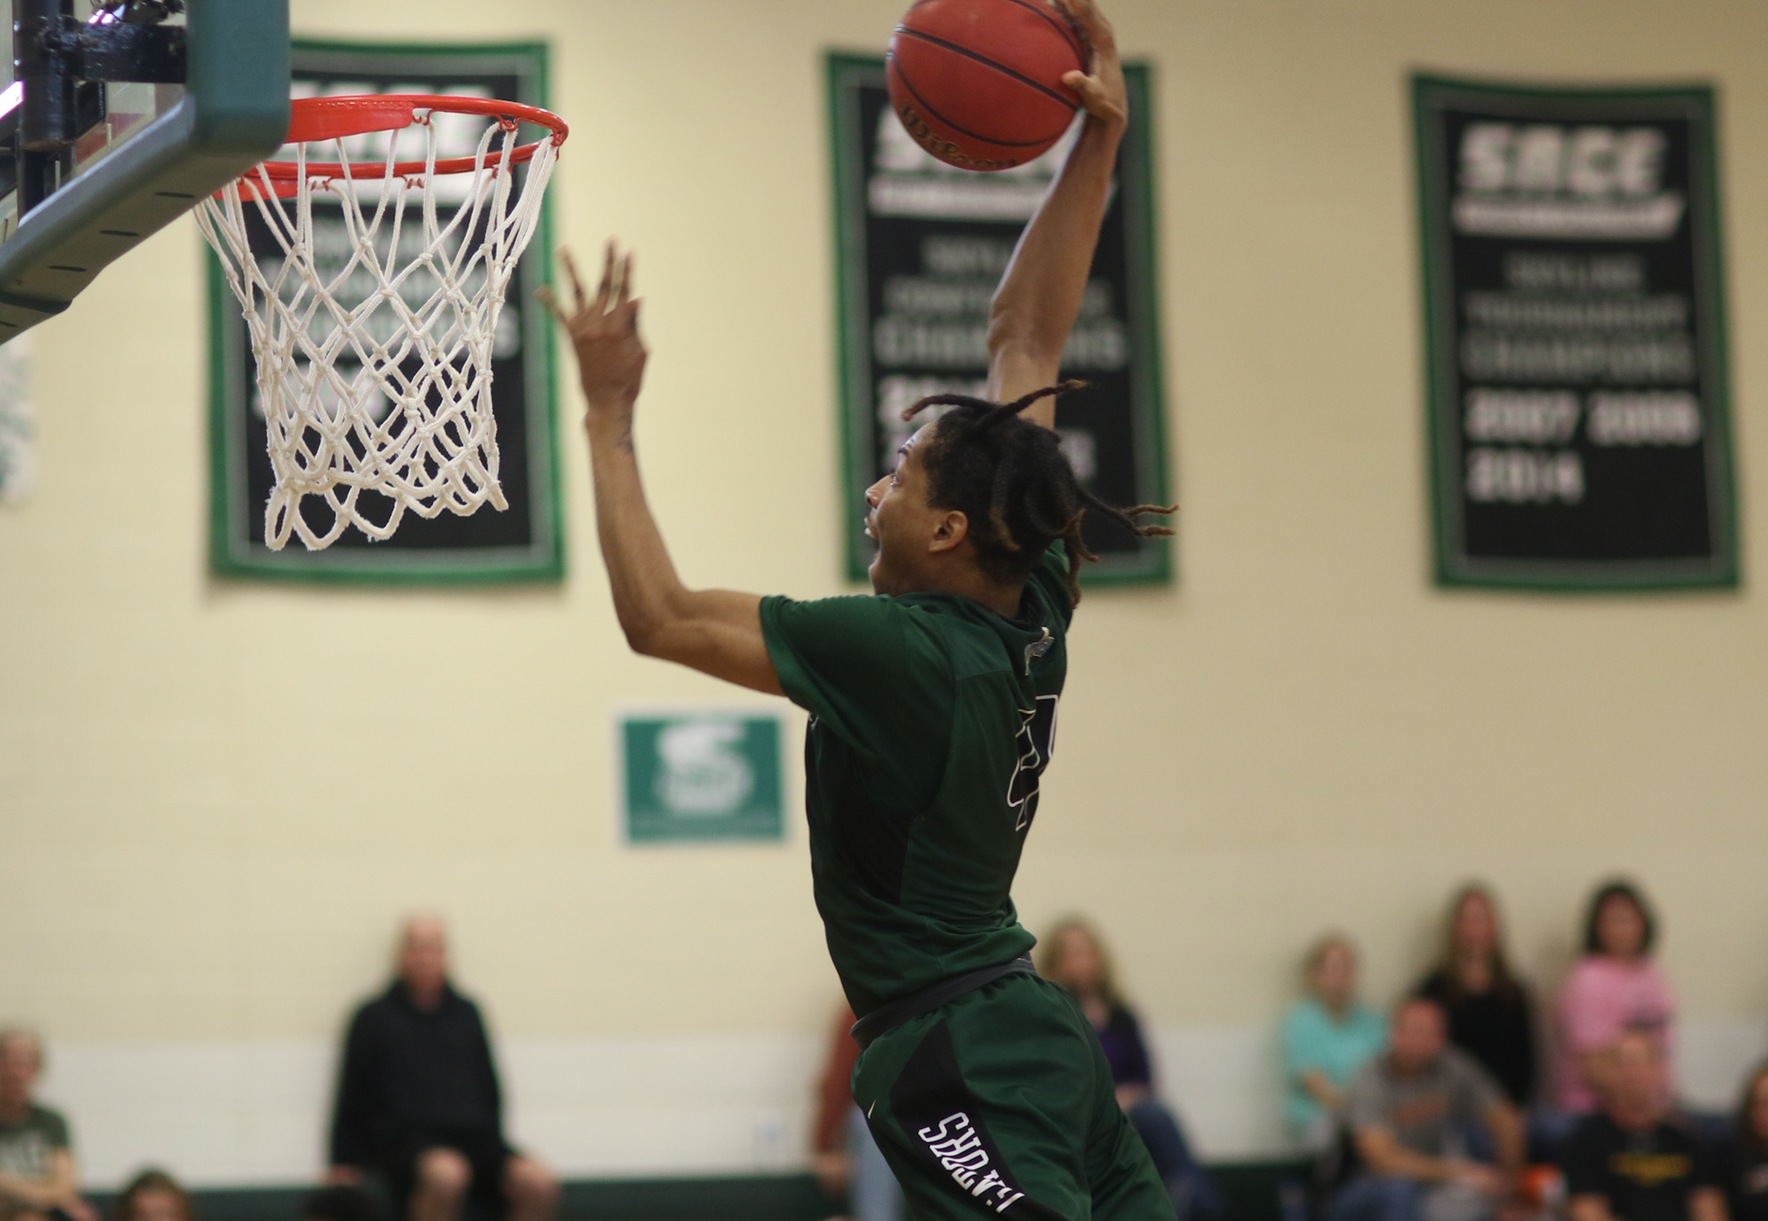 Sage men collect convincing win over Elmira in E8 action